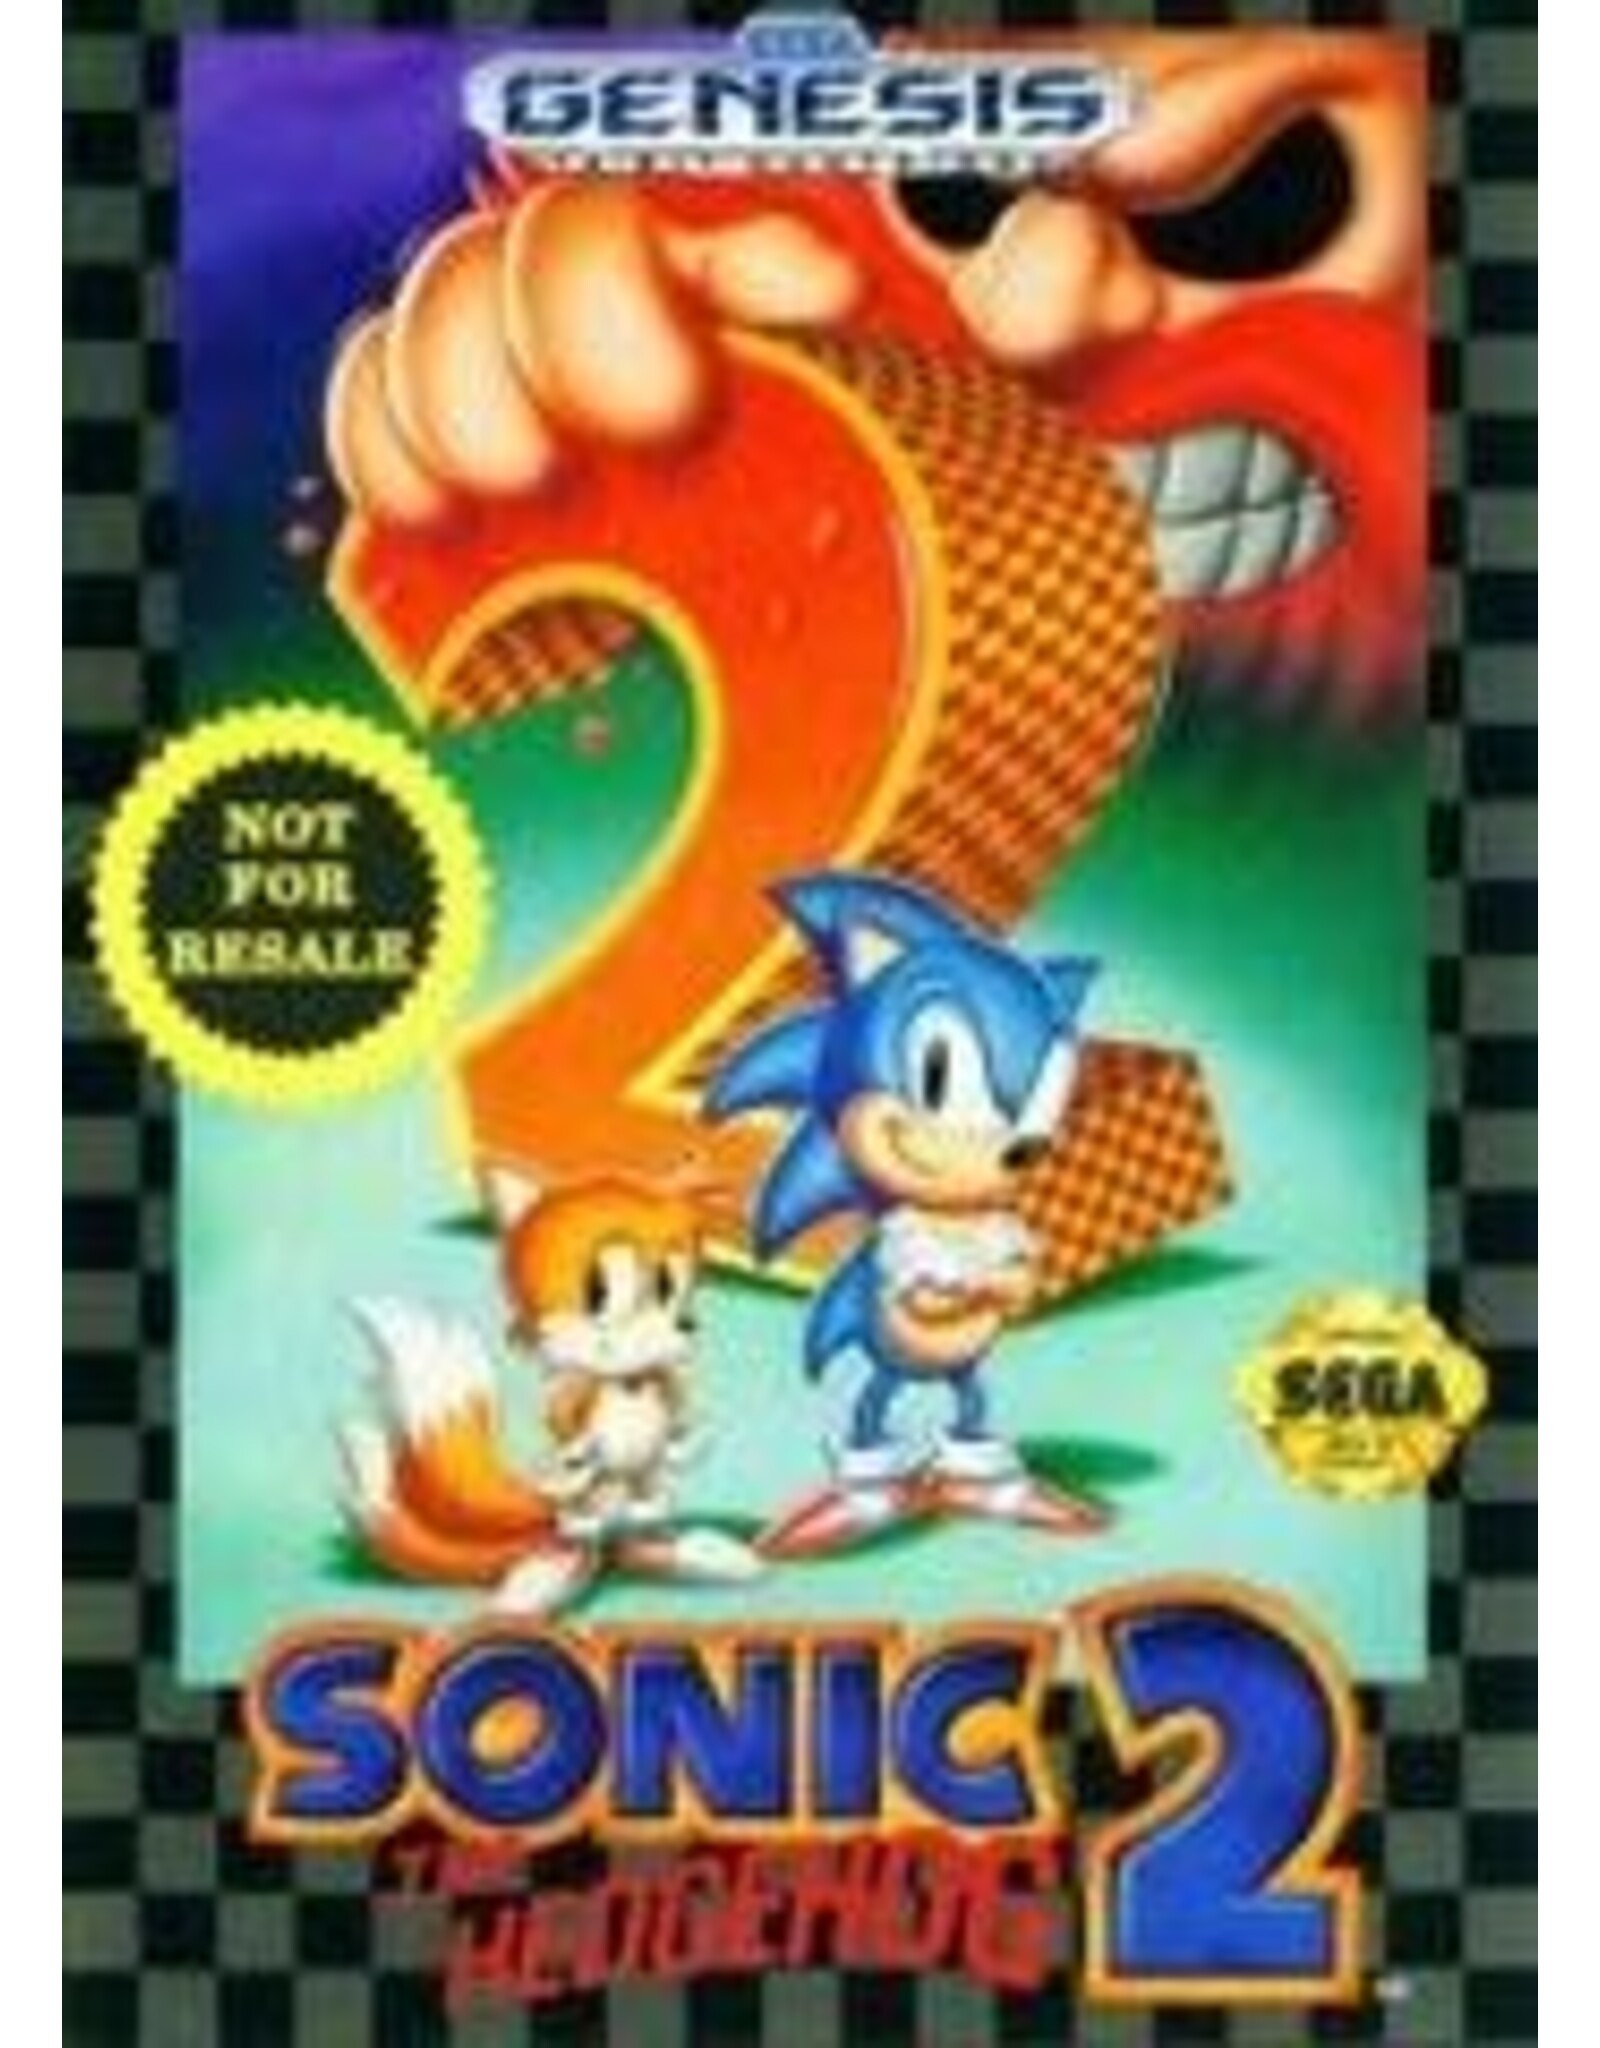 Sega Genesis Sonic the Hedgehog 2 - Not For Resale (Used, Cart Only, Cosmetic Damage)